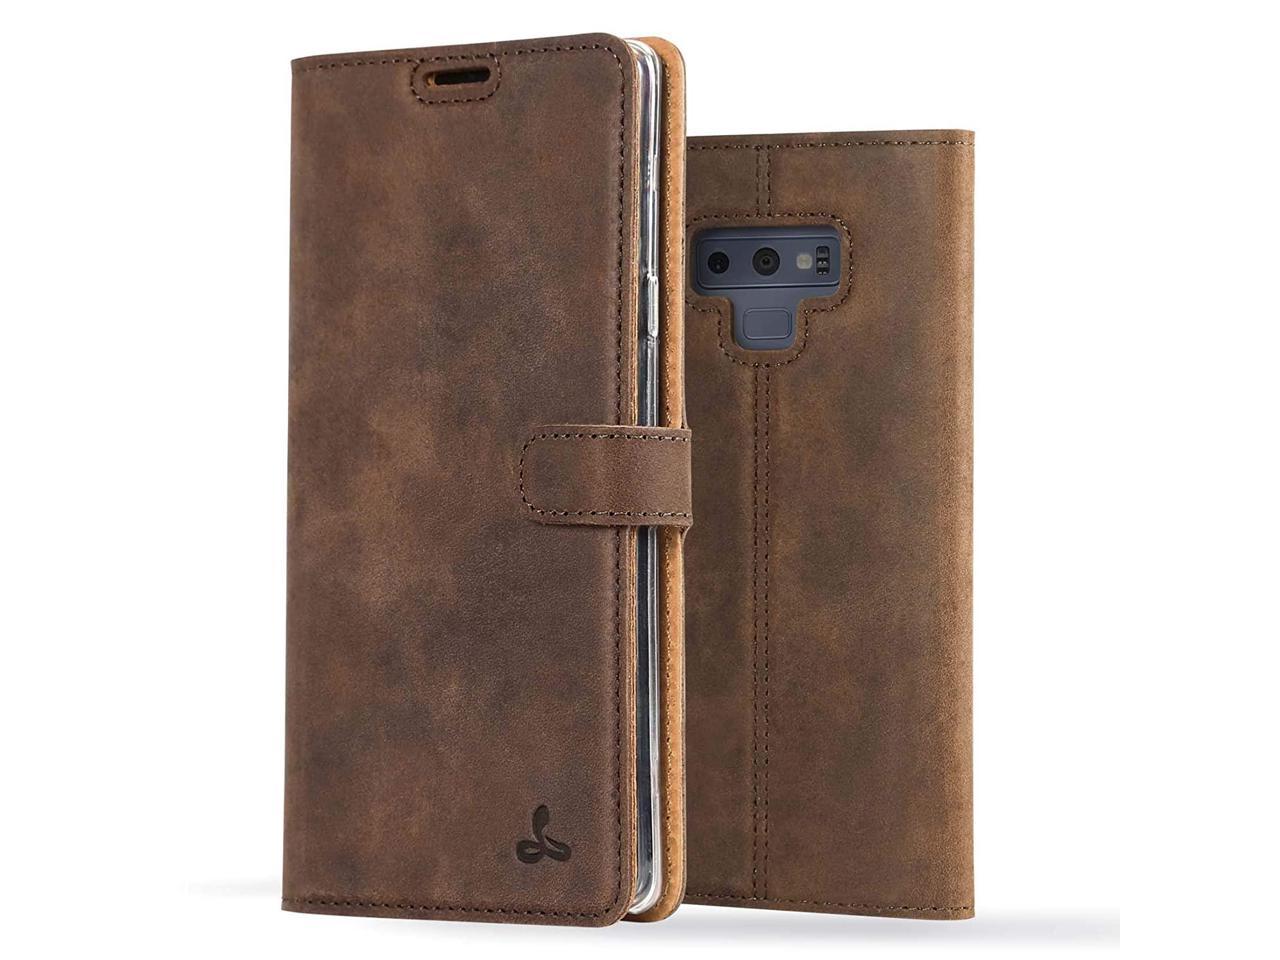 Flip Case for Samsung Galaxy Note9 Leather Cover Business Gifts Wallet with Extra Waterproof Underwater Case 